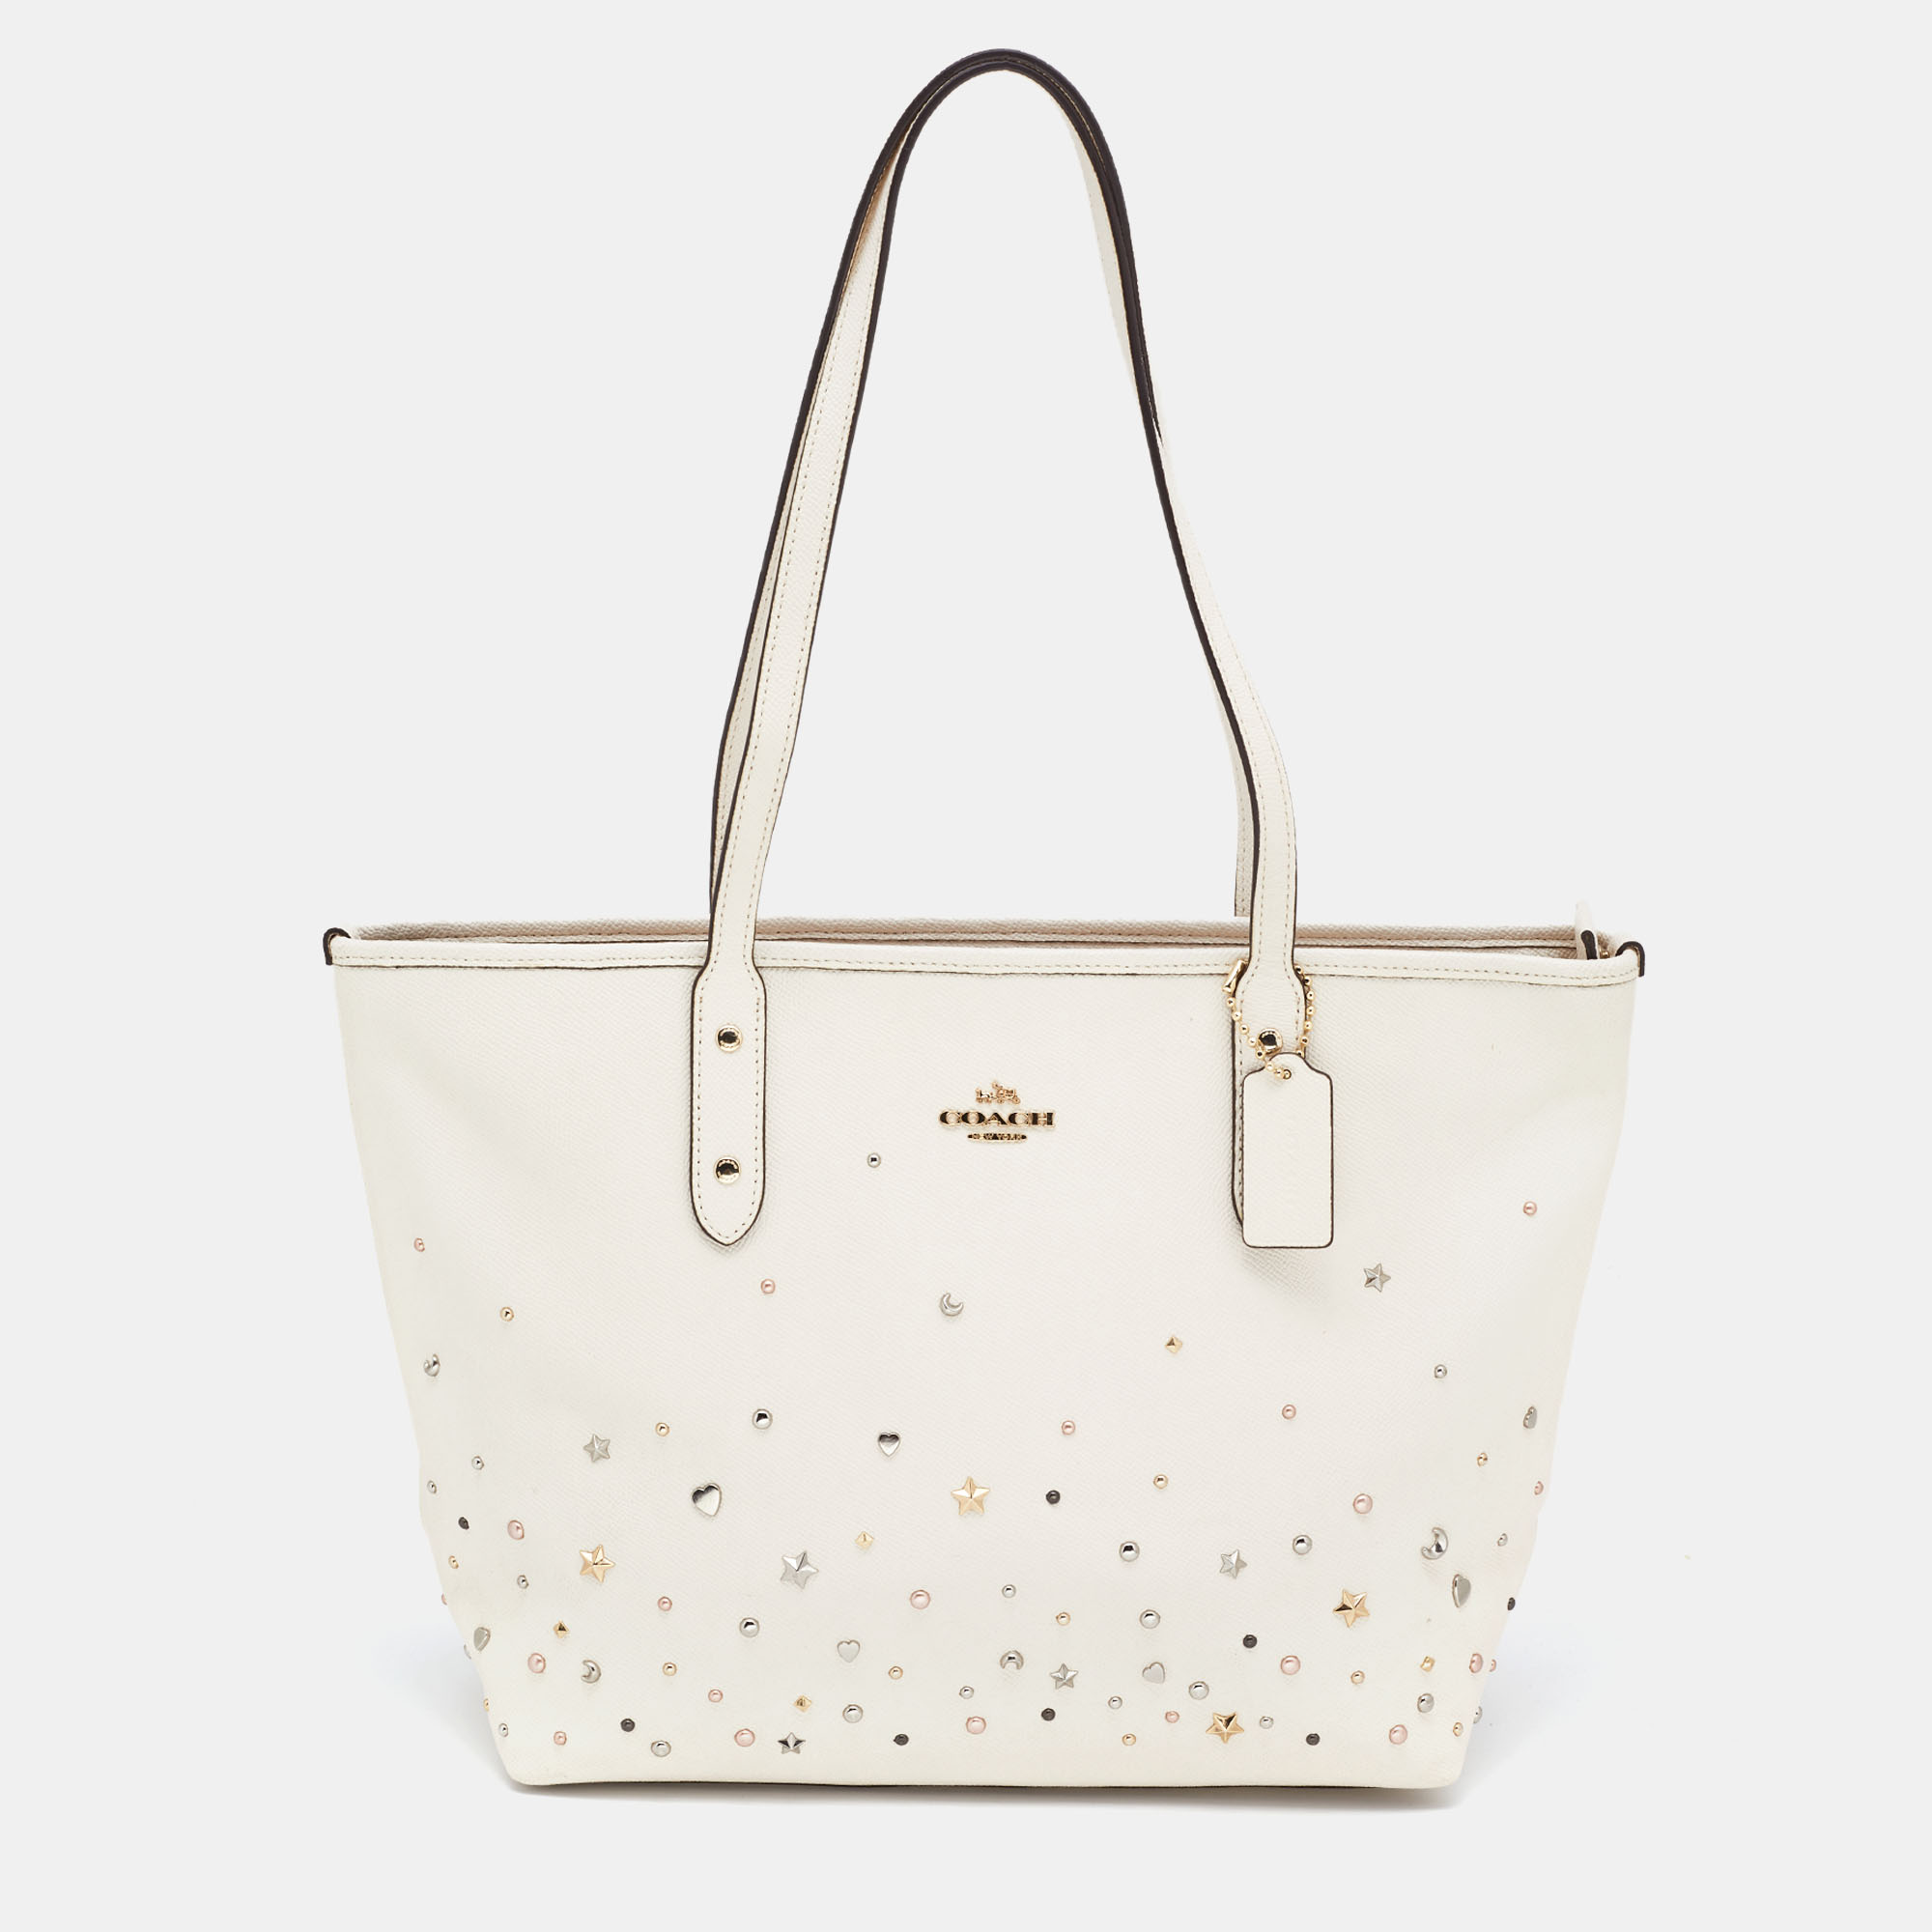 Be it your daily commute to work shopping sprees and vacations a tote bag will never fail you. This designer creation is made to last and assist you in your fashion filled days.